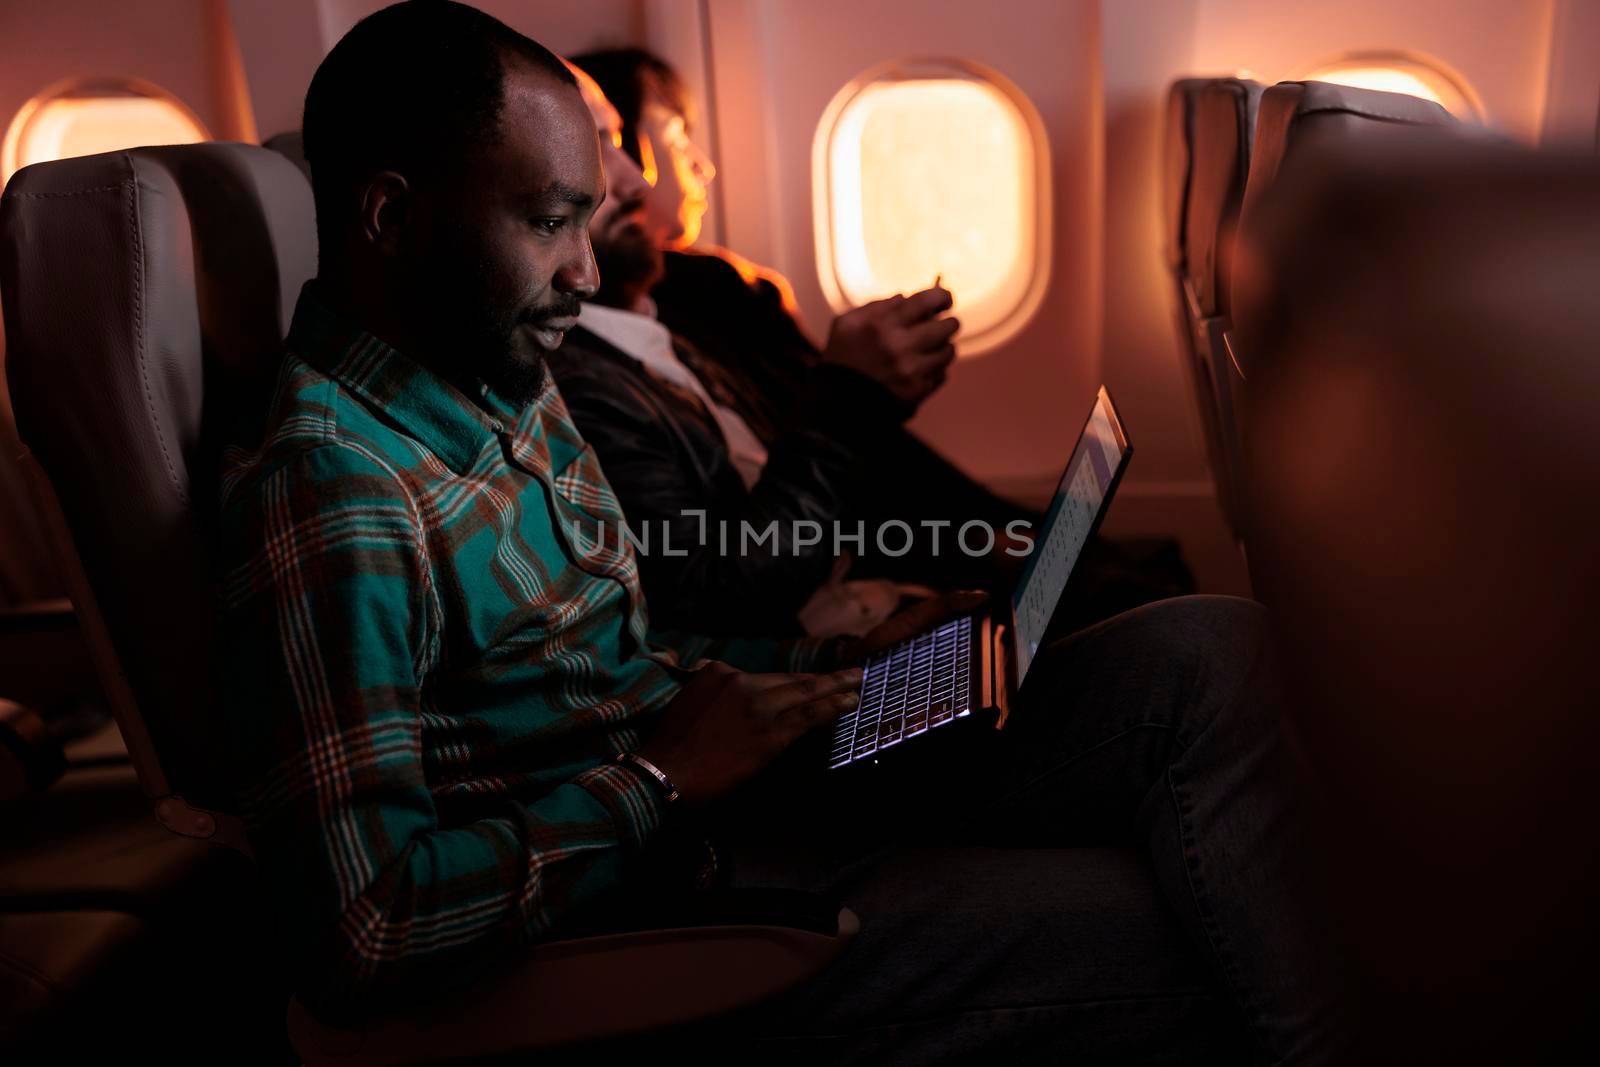 Modern traveller browsing internet on laptop and flying abroad in airplane, using international airline to travel on business work trip. Young man working on computer and travelling during sunset.